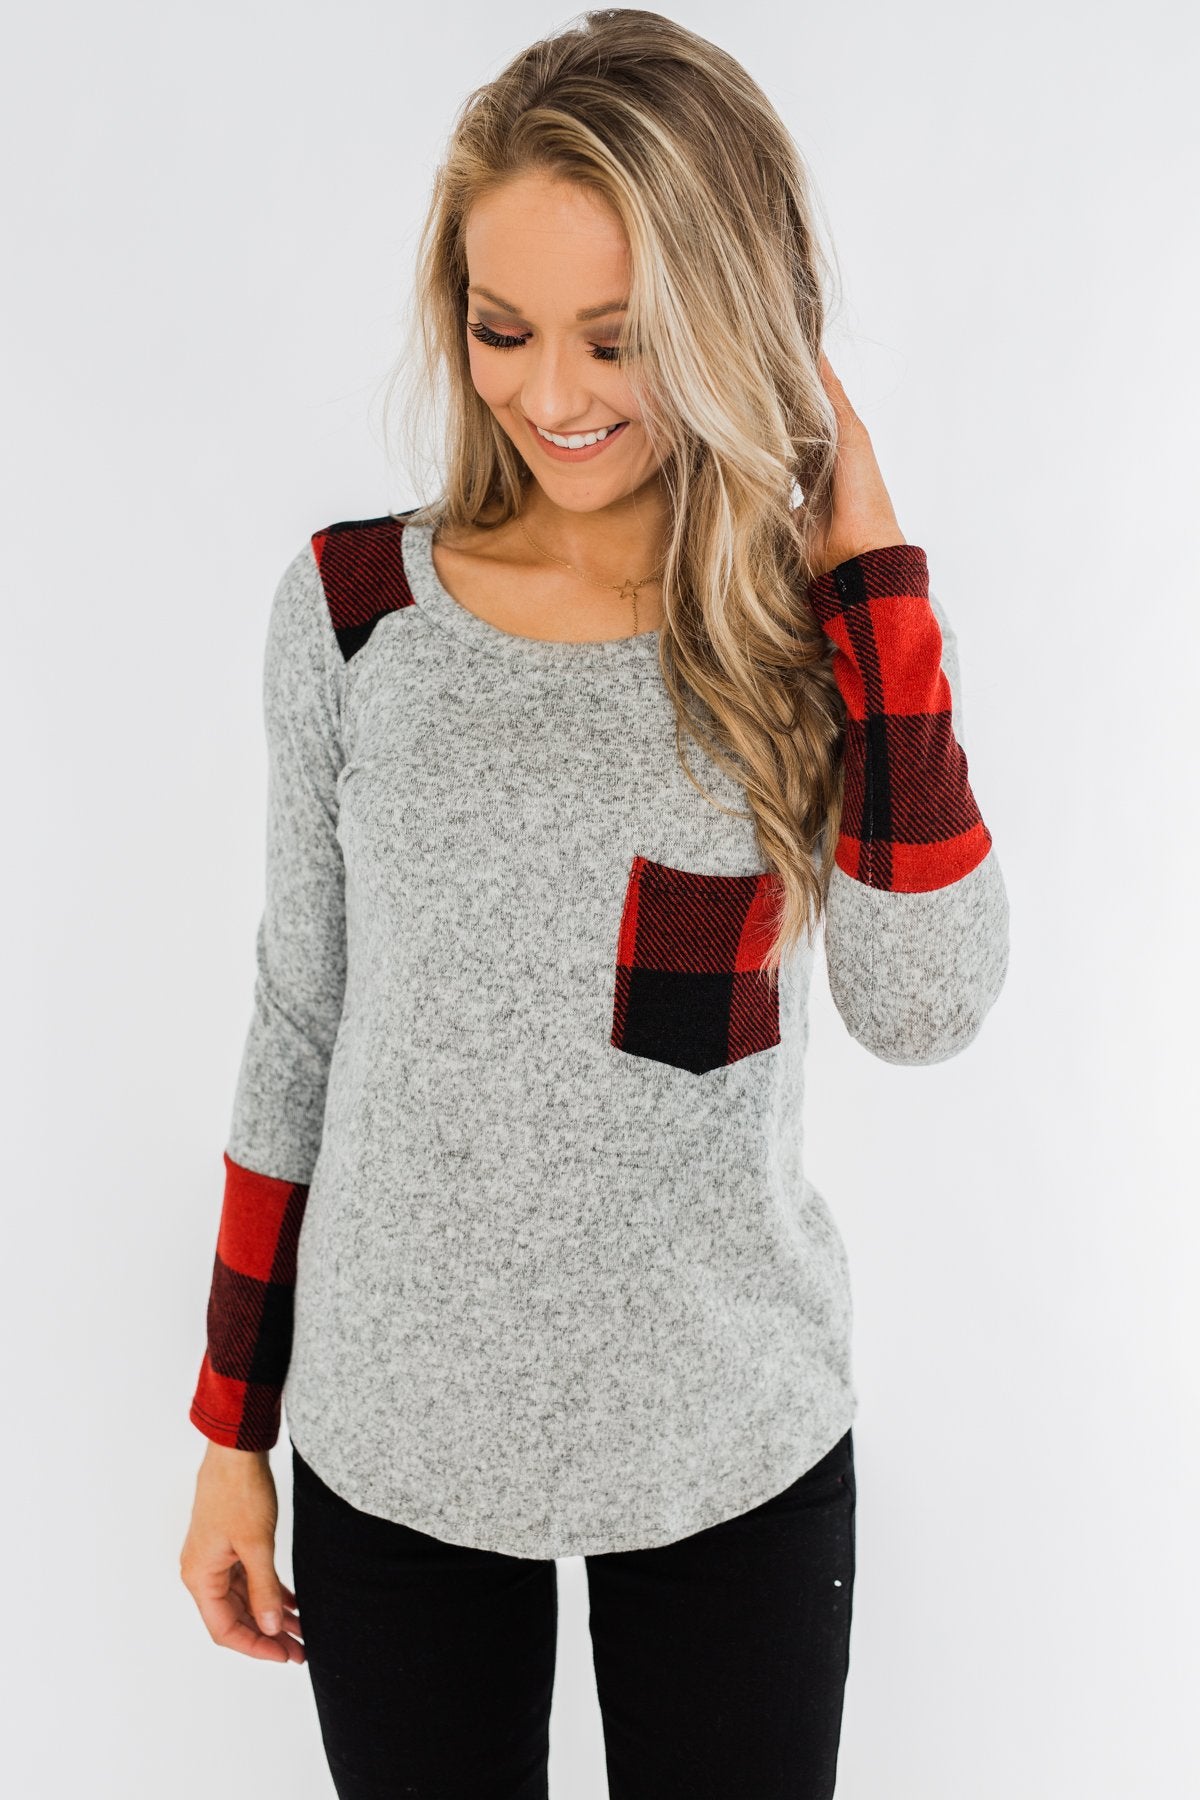 Matters To Me Pocket Top- Heather Grey